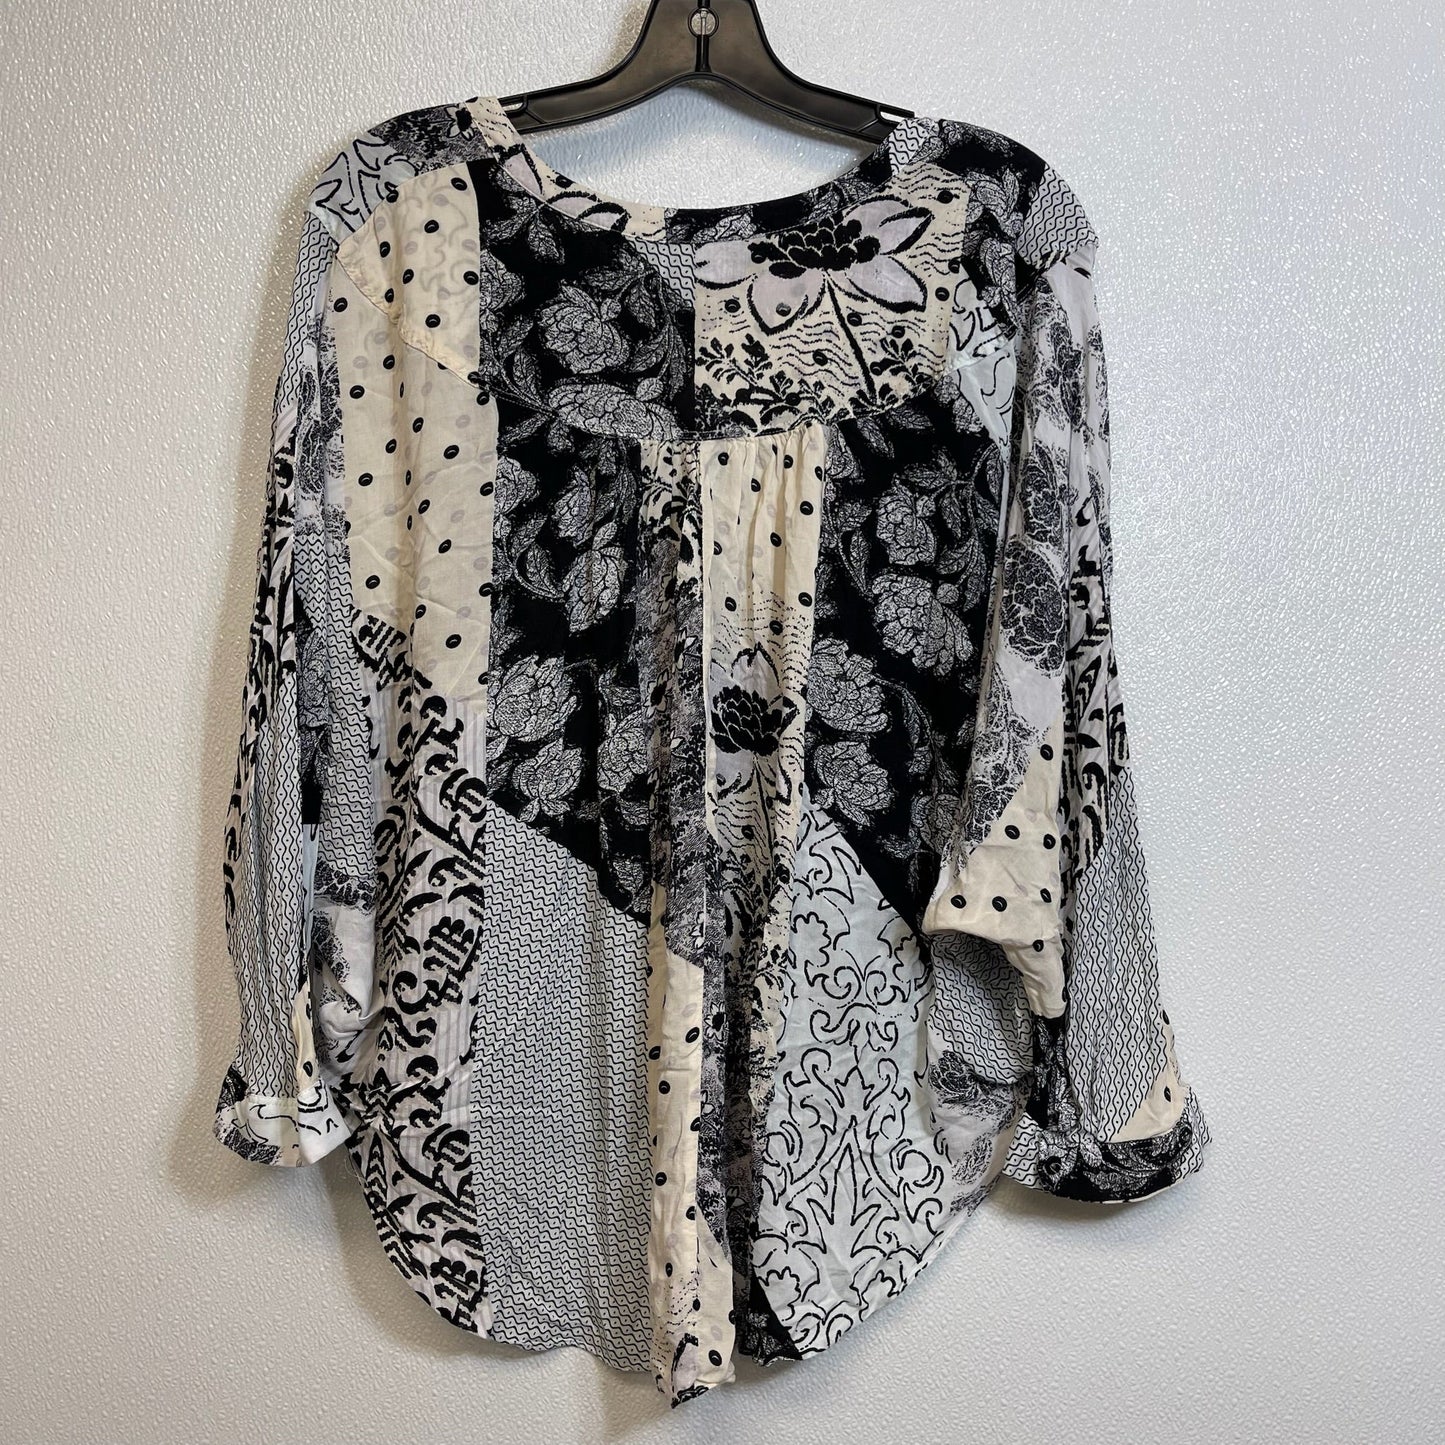 Multi-colored Top 3/4 Sleeve Maeve, Size M